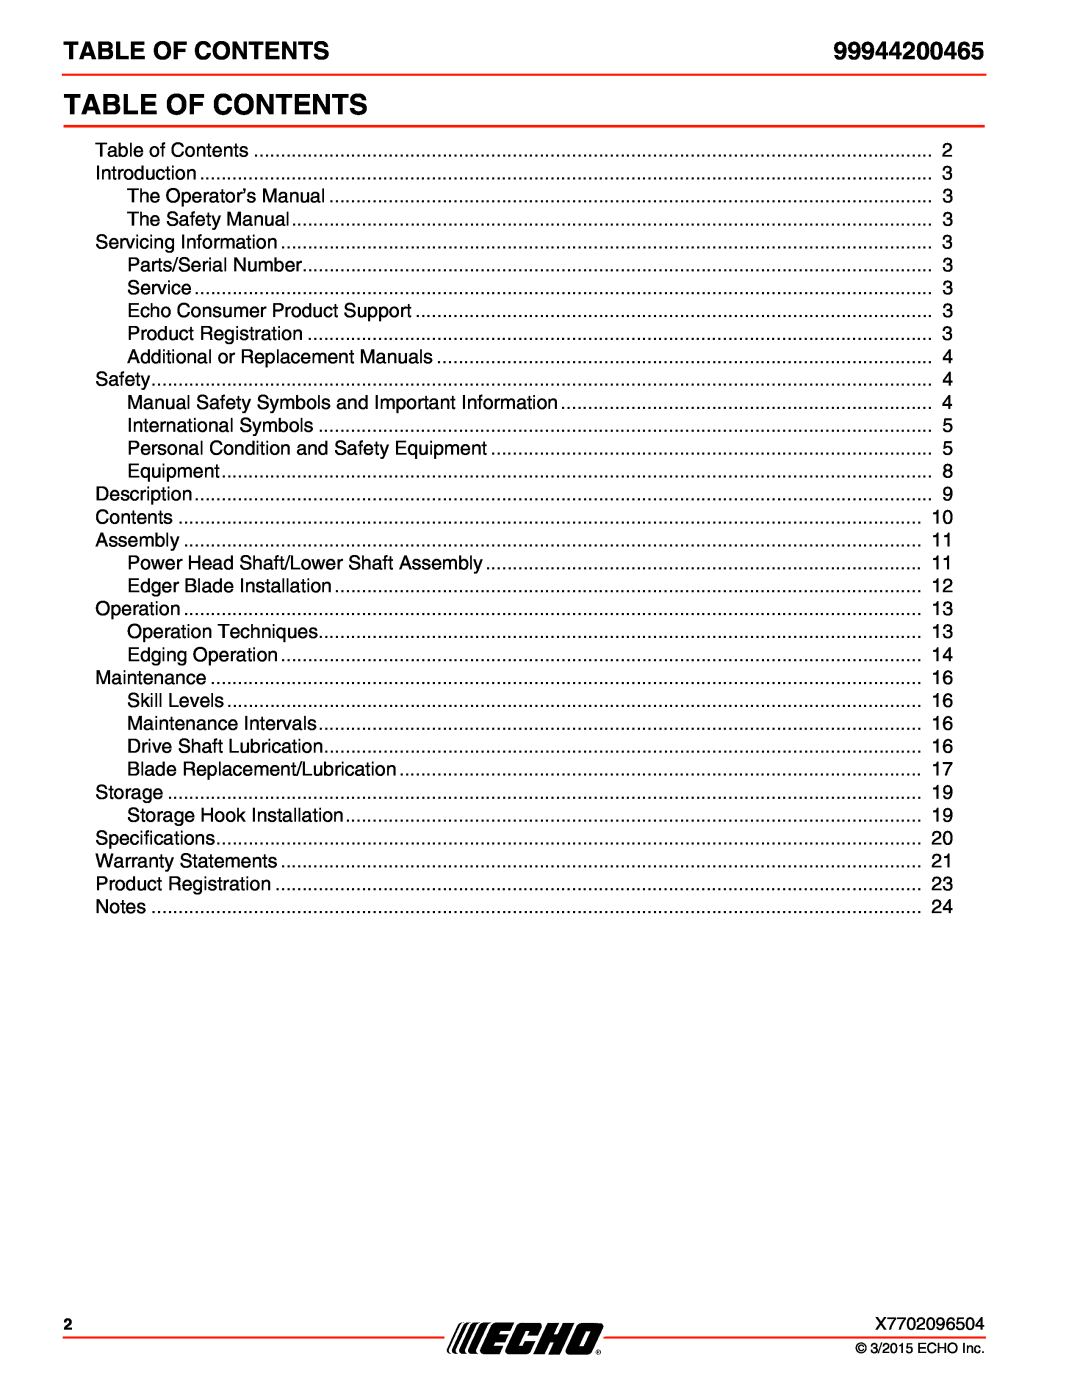 Echo 99944200465 specifications Table Of Contents 